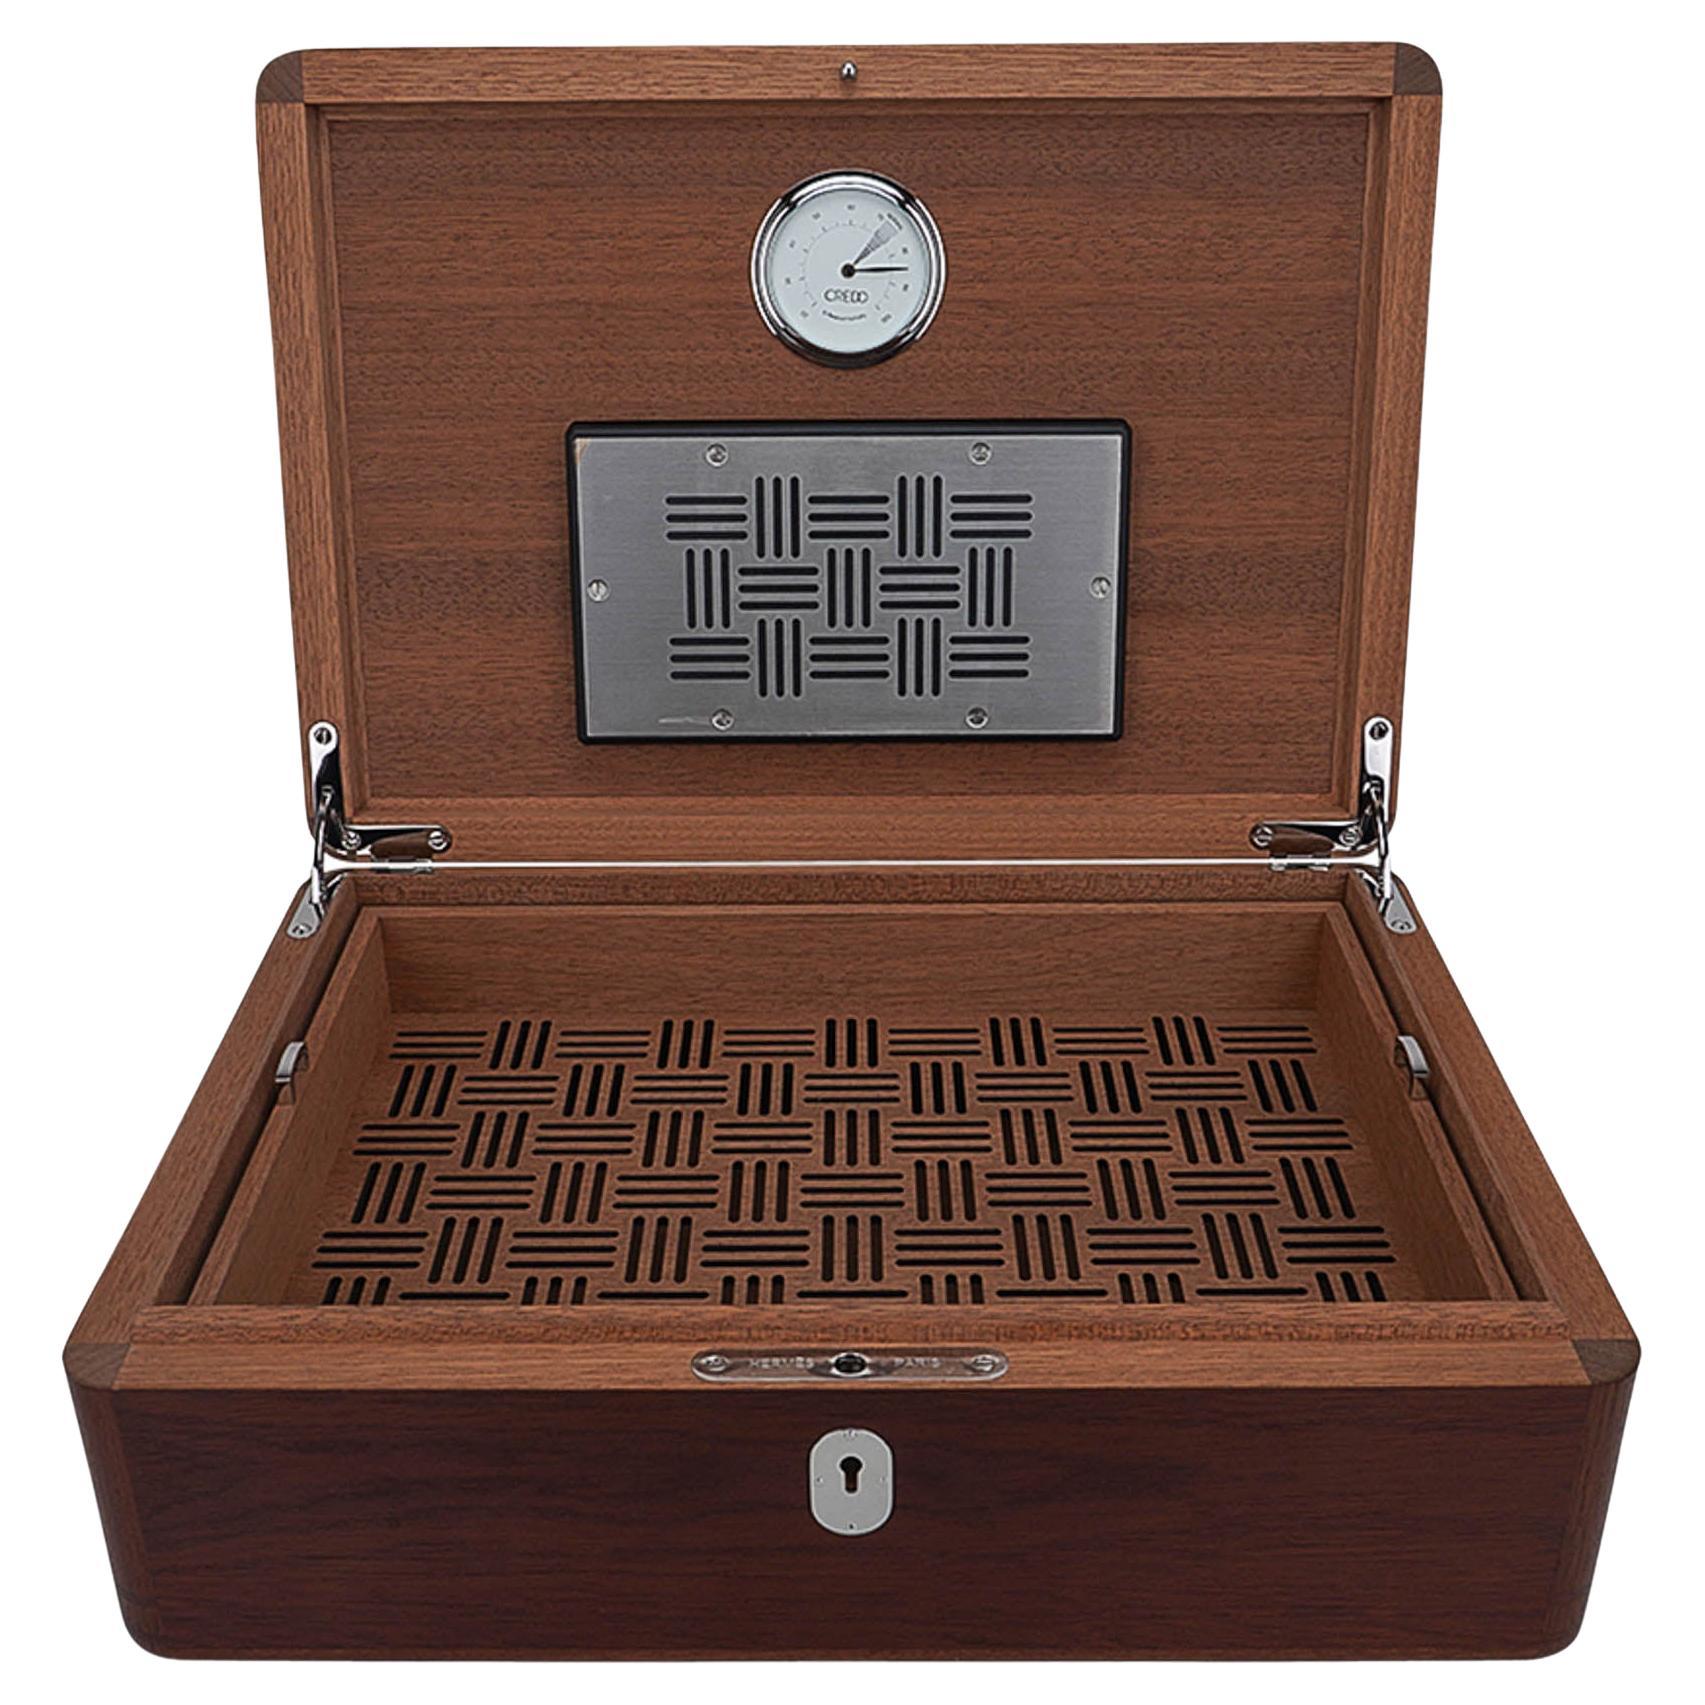 Hermes Coffret a Cigares Humidor Limited Edition Sycamore Holz Sesam Eidechse im Angebot